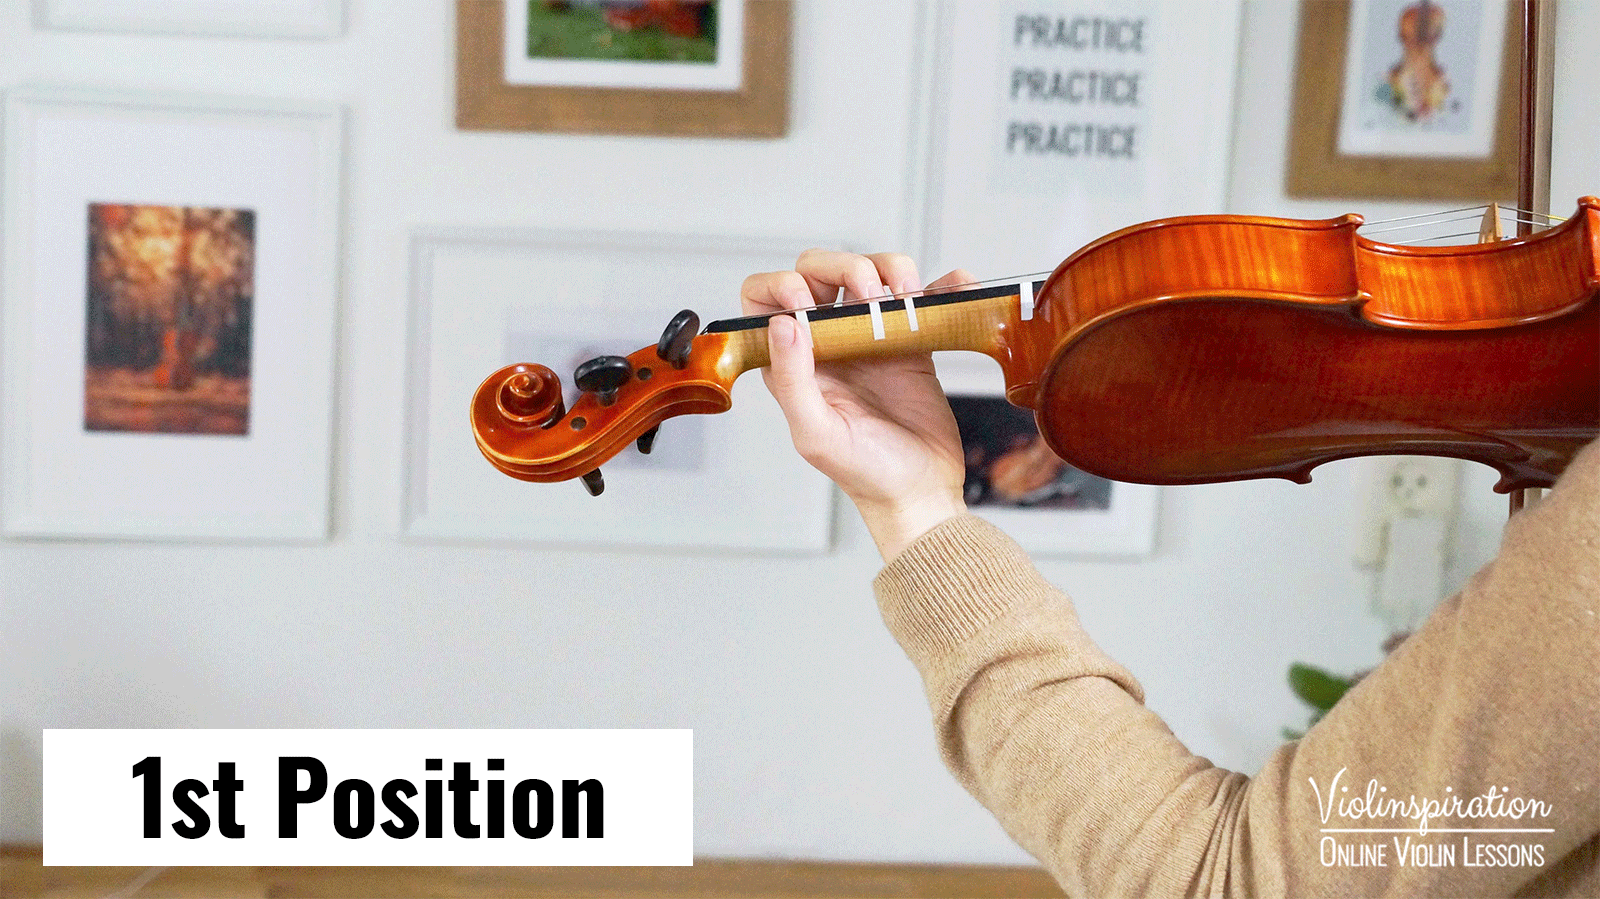 finger placement on violin - All Violin Positions thumb position